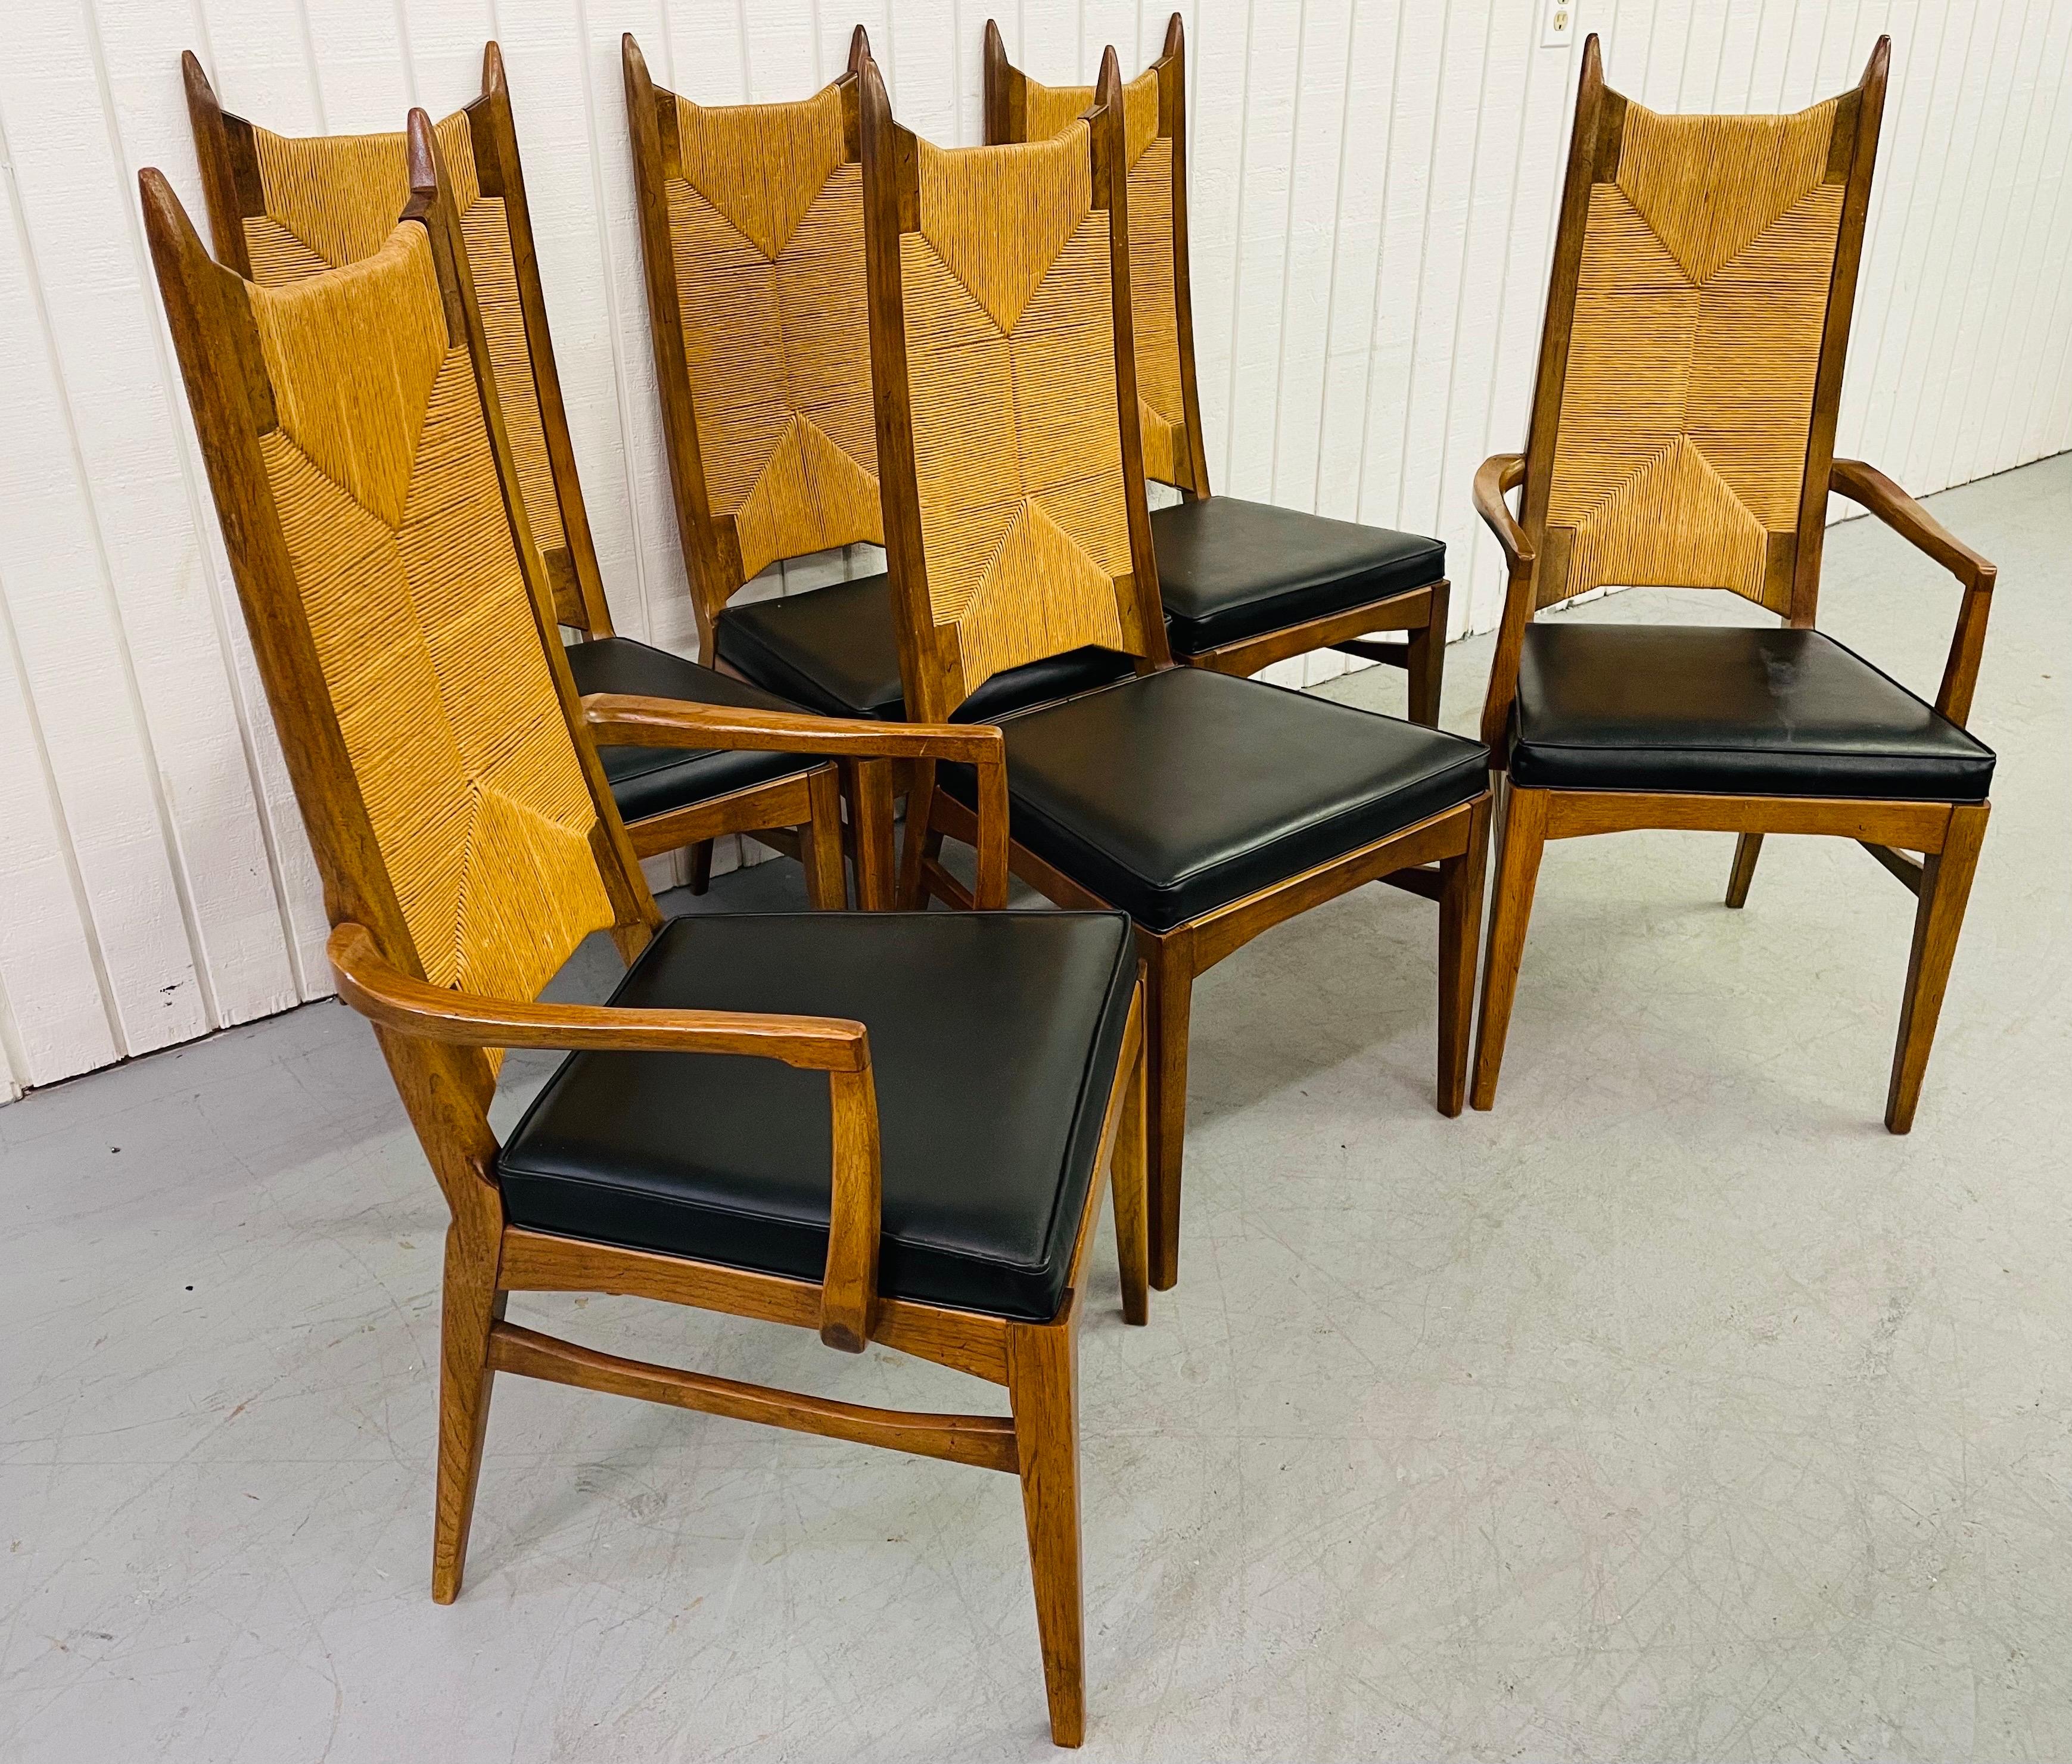 This listing is for a set of six mid-century walnut dining chairs. Featuring a rush back design, spear shaped tops, black leather seats, and a light walnut finish.